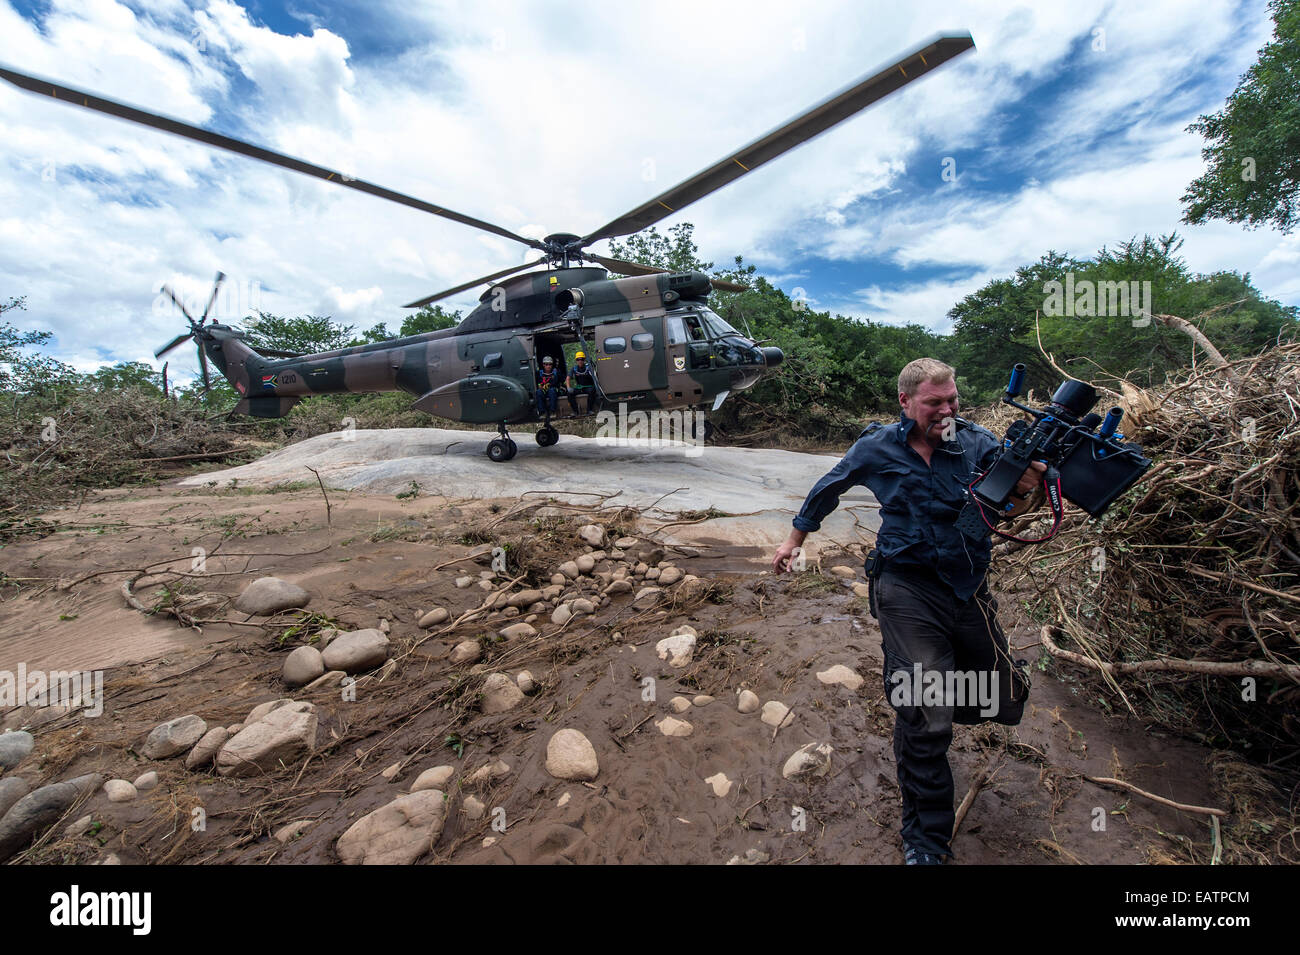 A cameraman runs from the downdraft of an airforce helicopter. Stock Photo